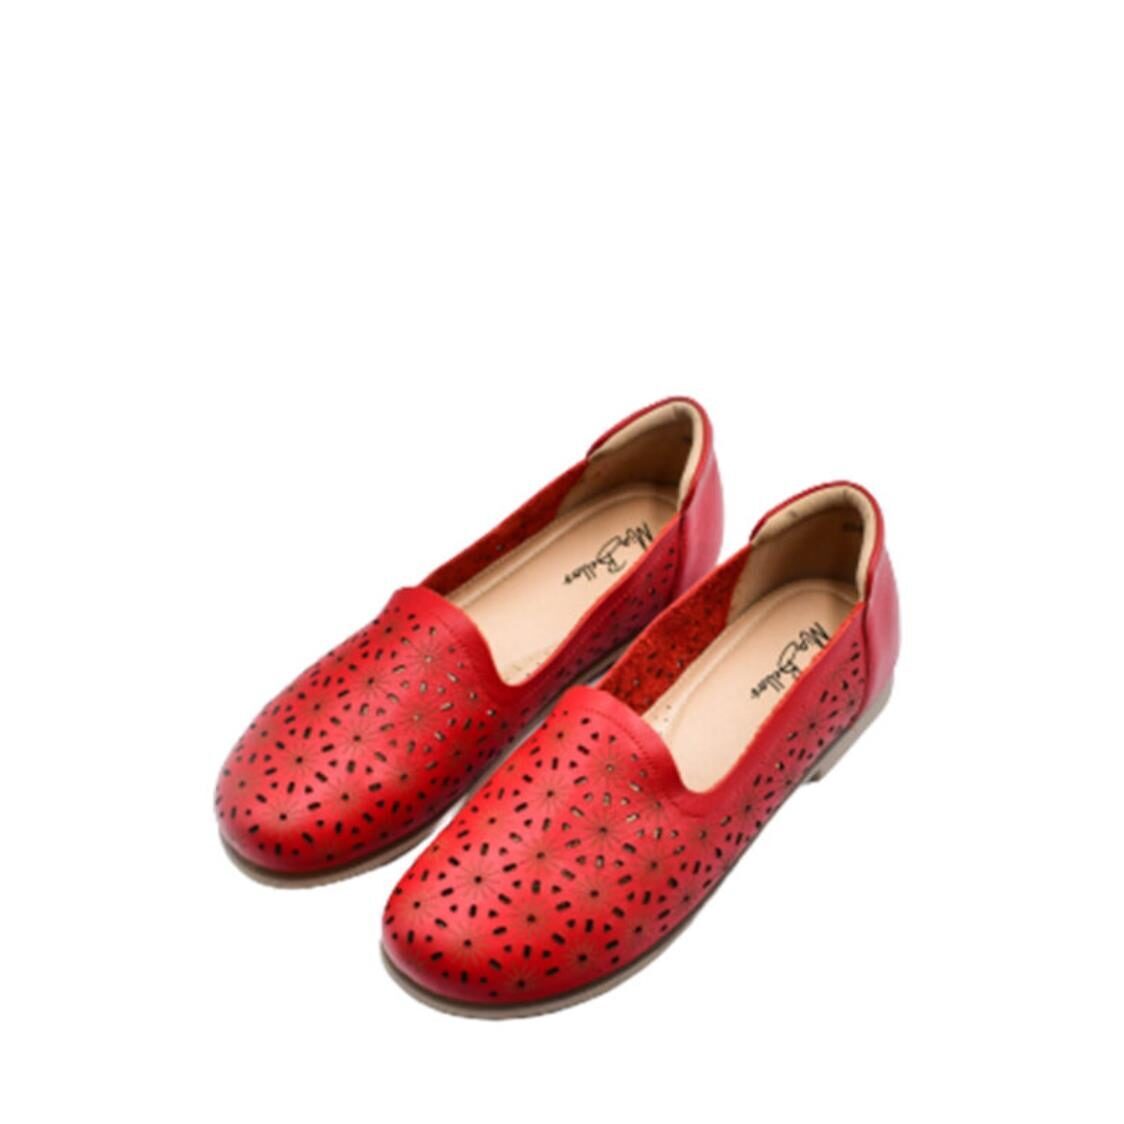 Mia Bellos Perforated Comfort Leather Shoe Red MB5049